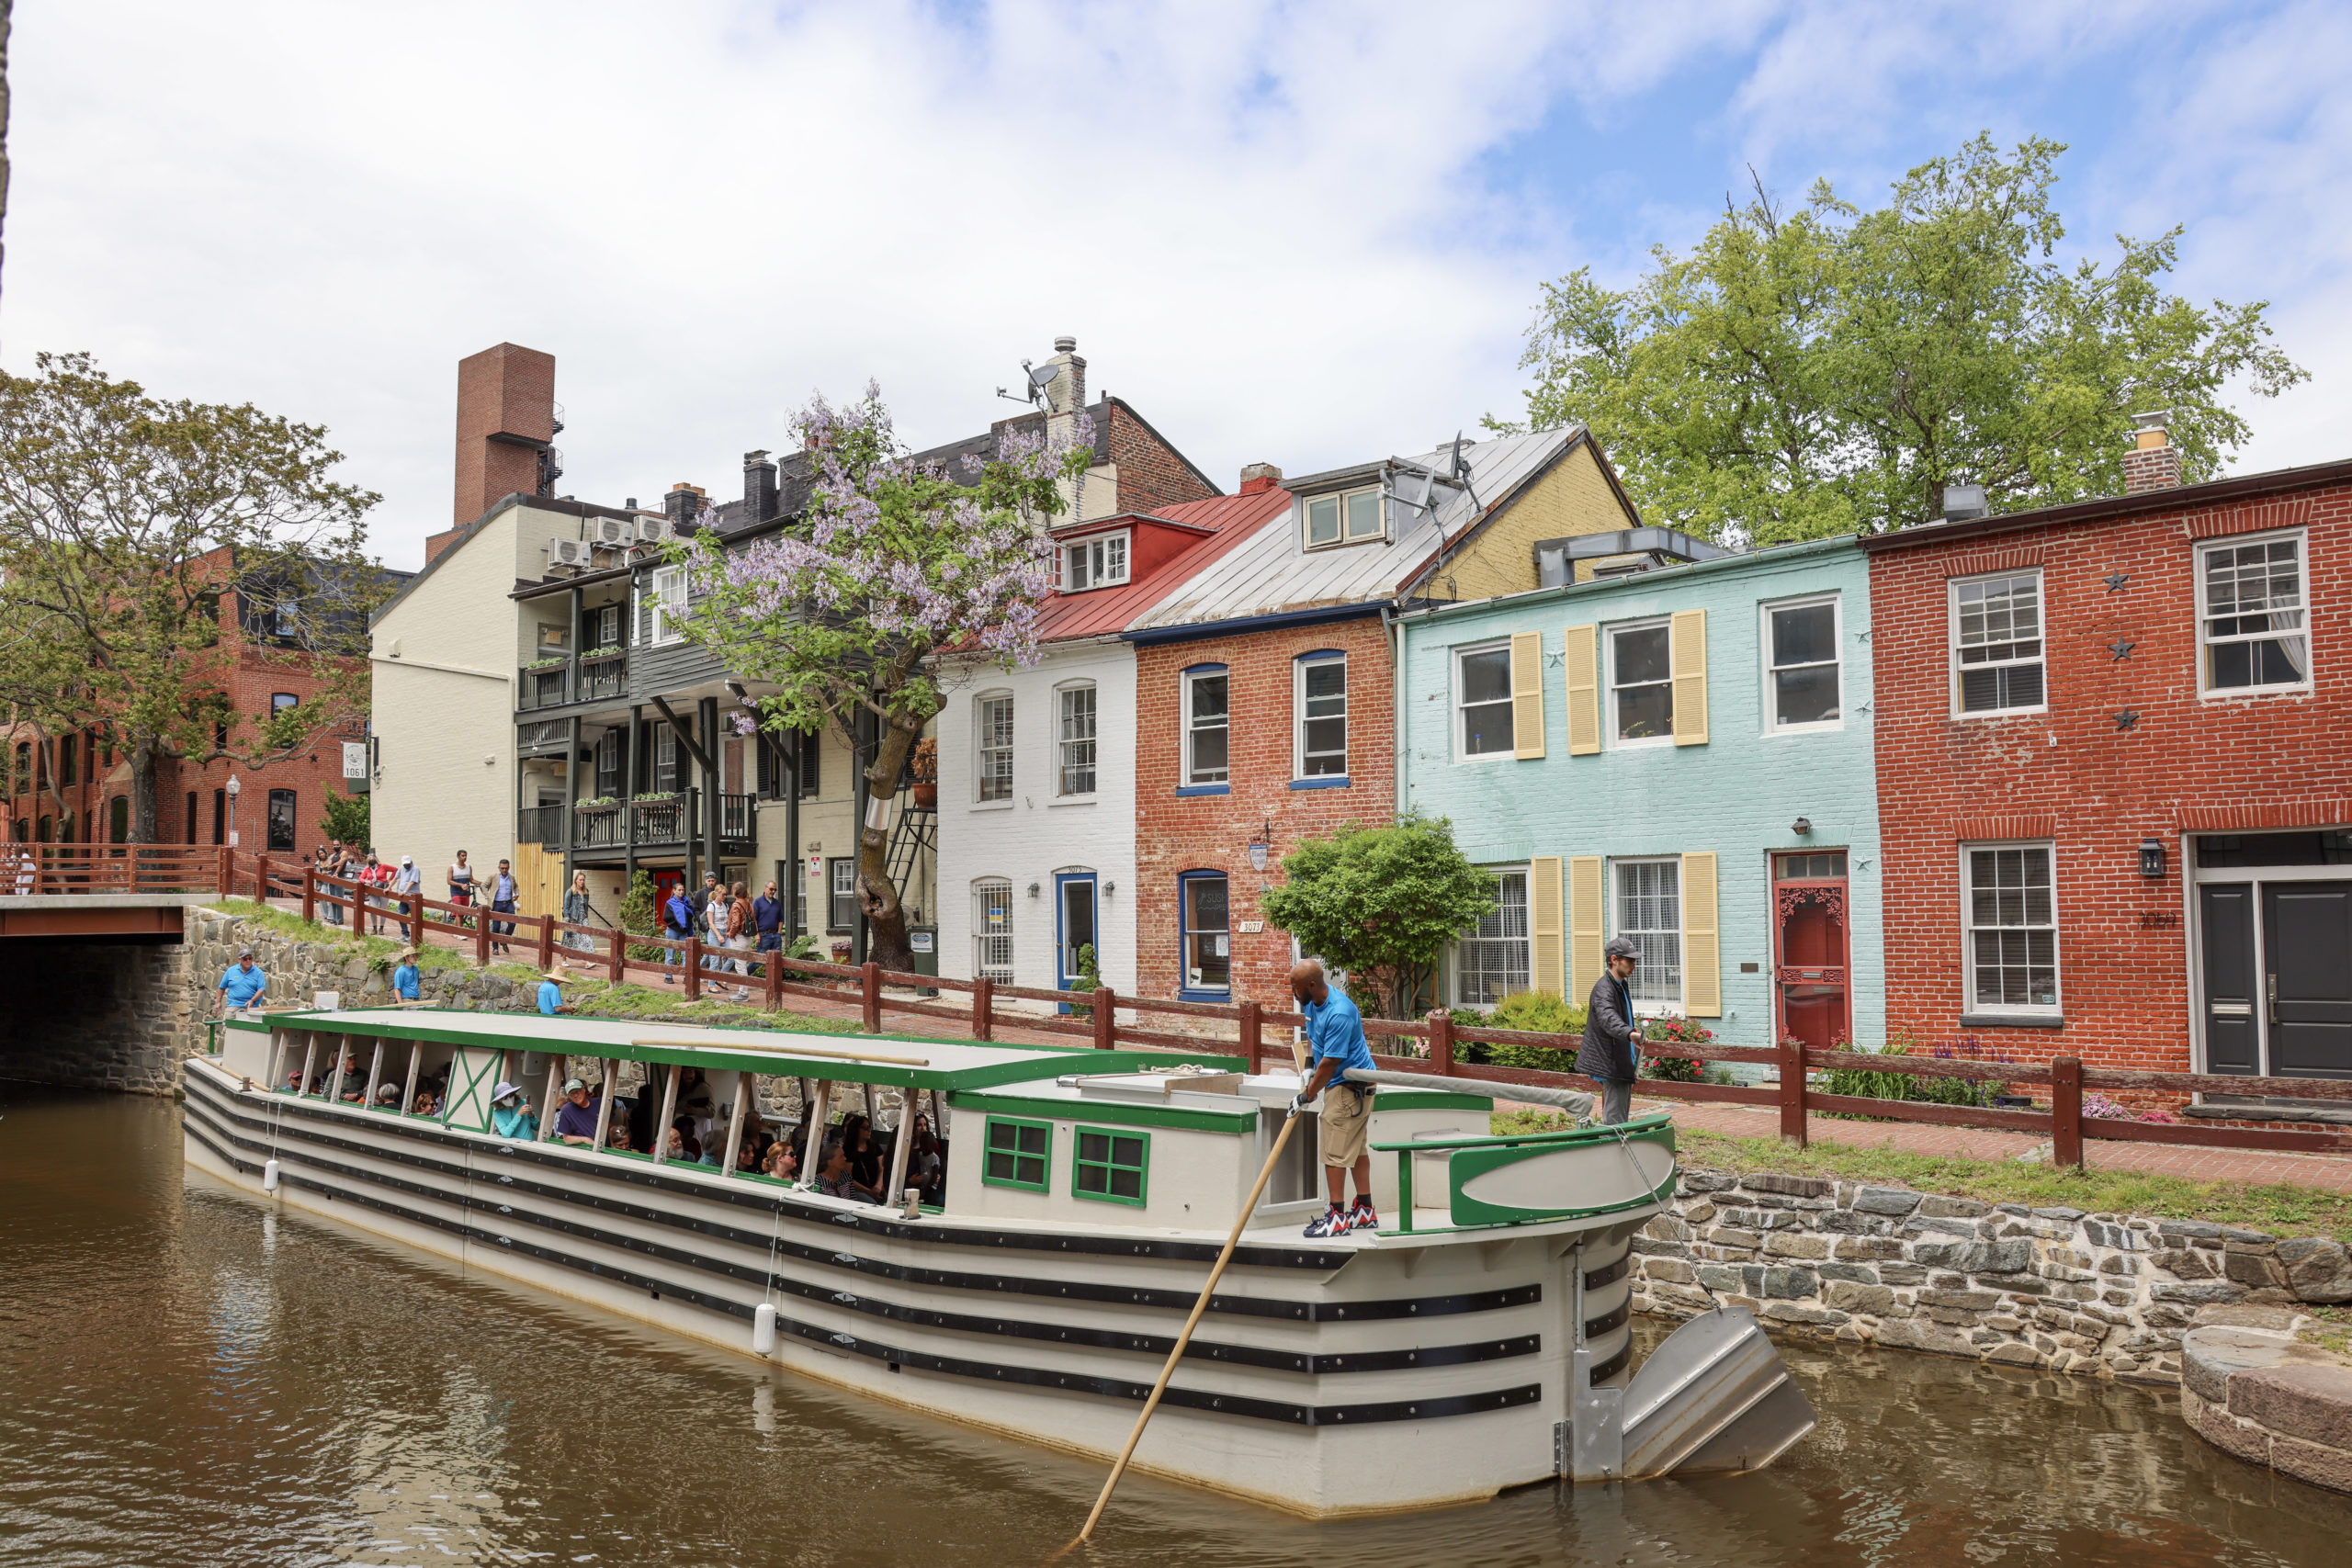 c&o canal tours georgetown